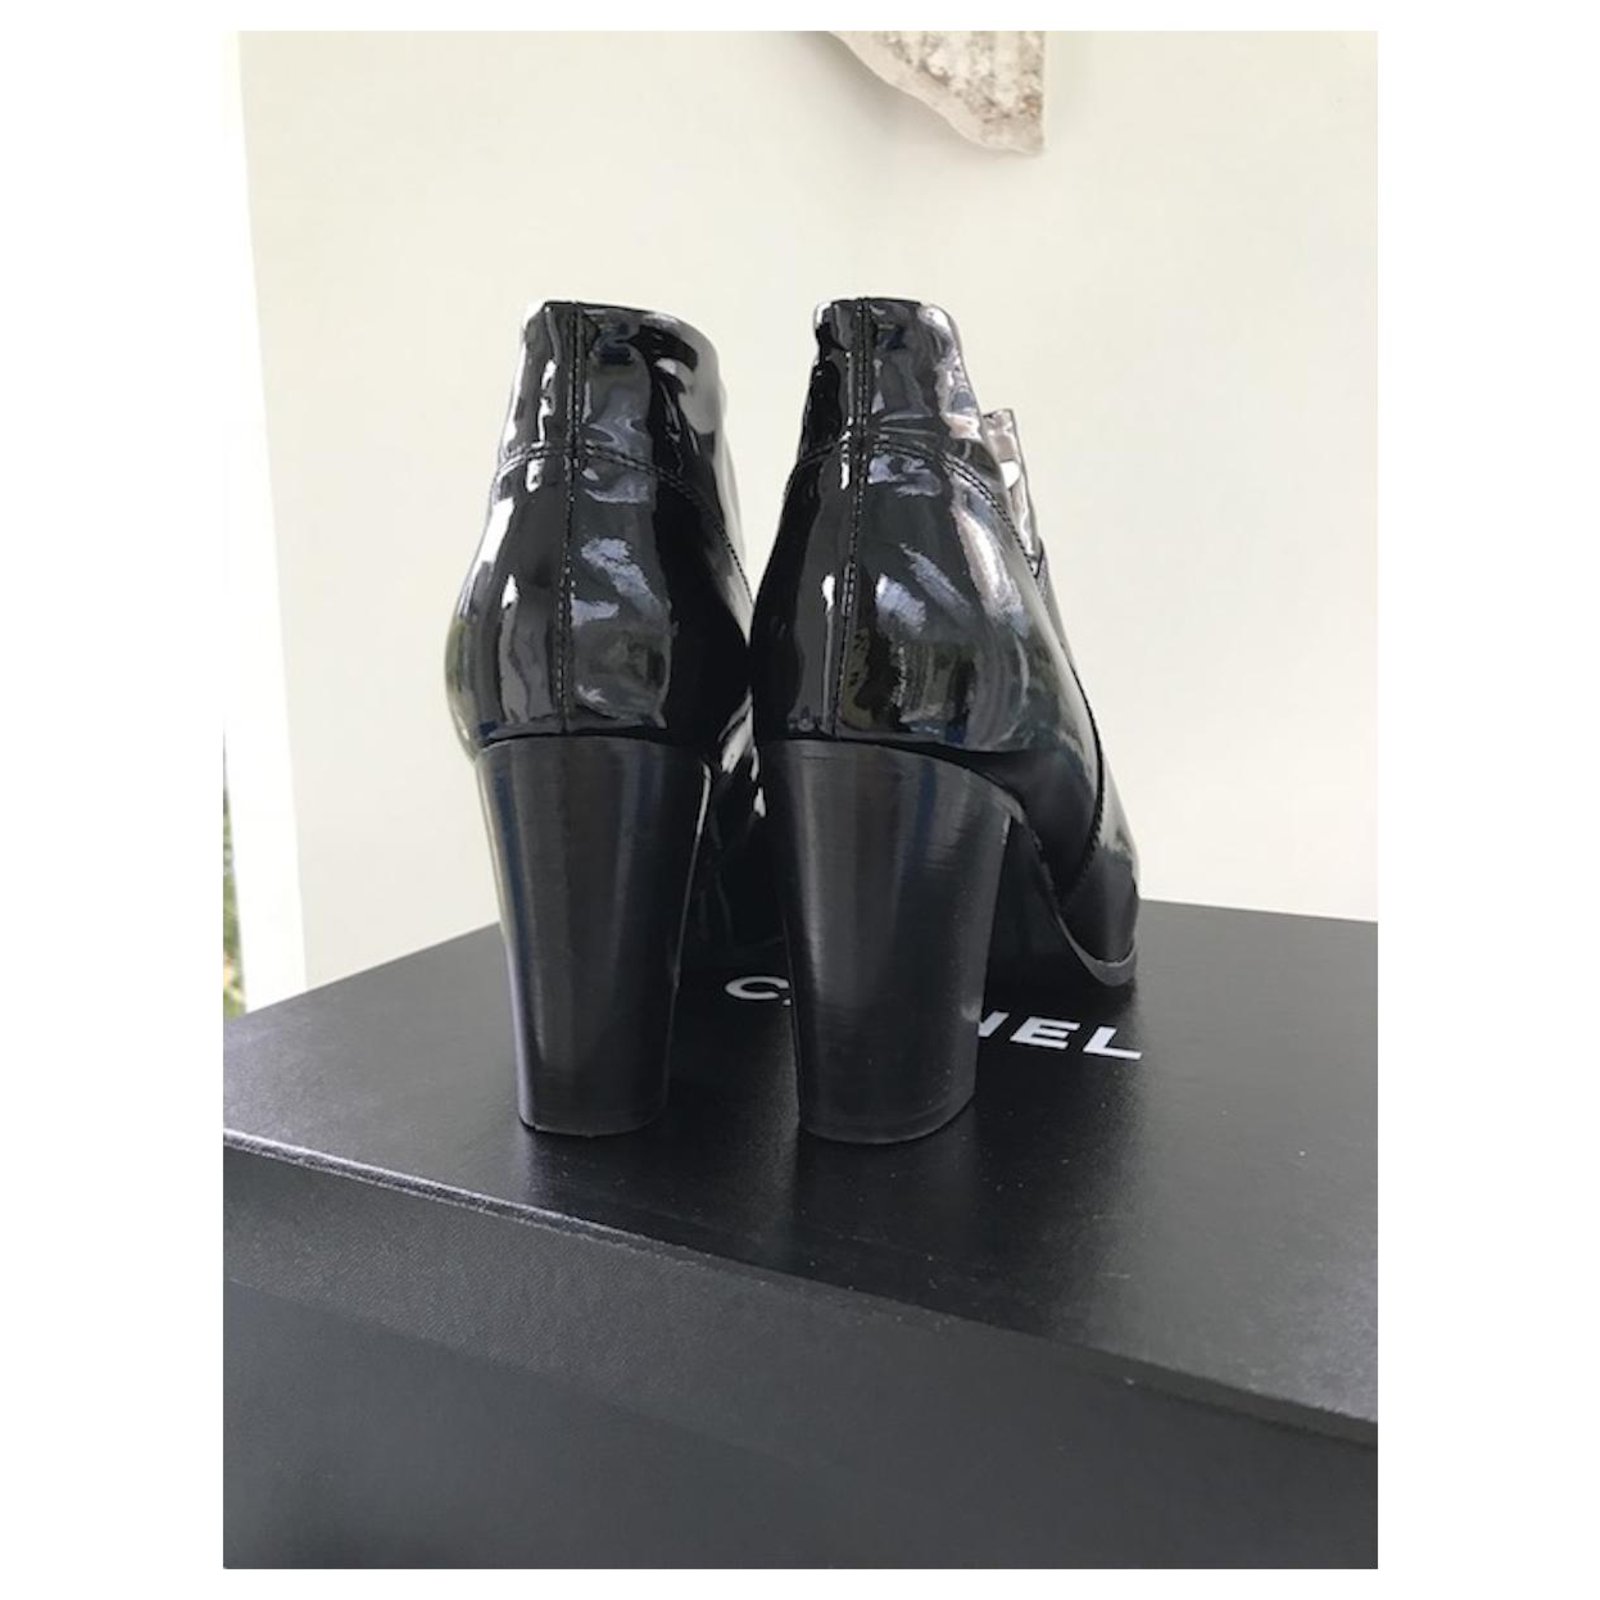 CHANEL patent leather boots